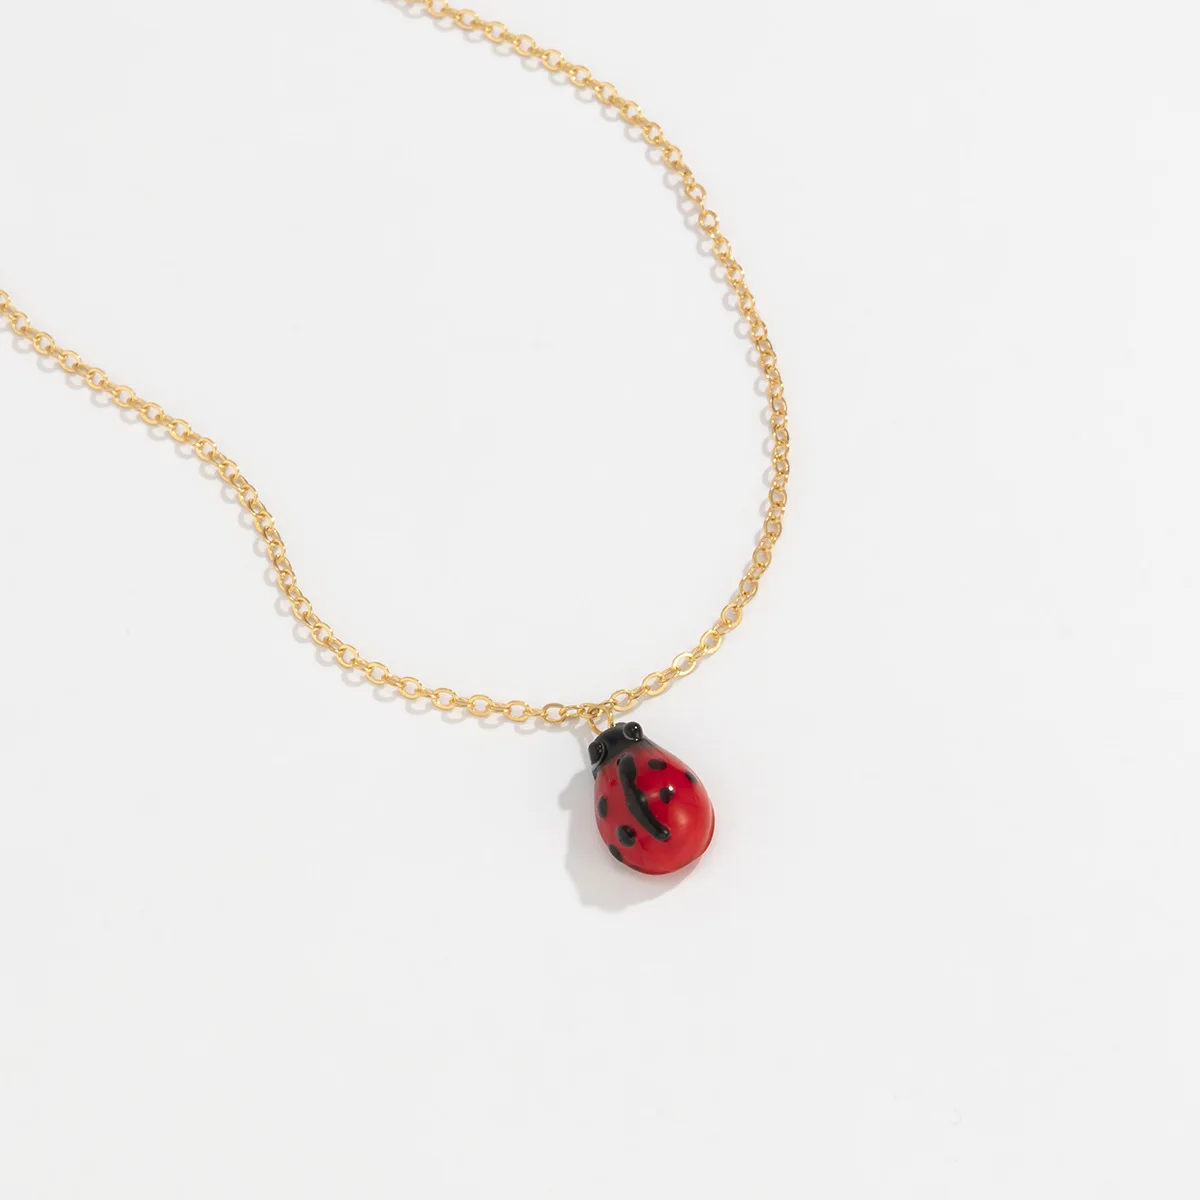 

Ding yi Hornet Wasp Ladybug Ladybird Beetle Bee Necklace Metal Choker Chain Pendant Necklace Fashion Costume Jewellery, Colorful